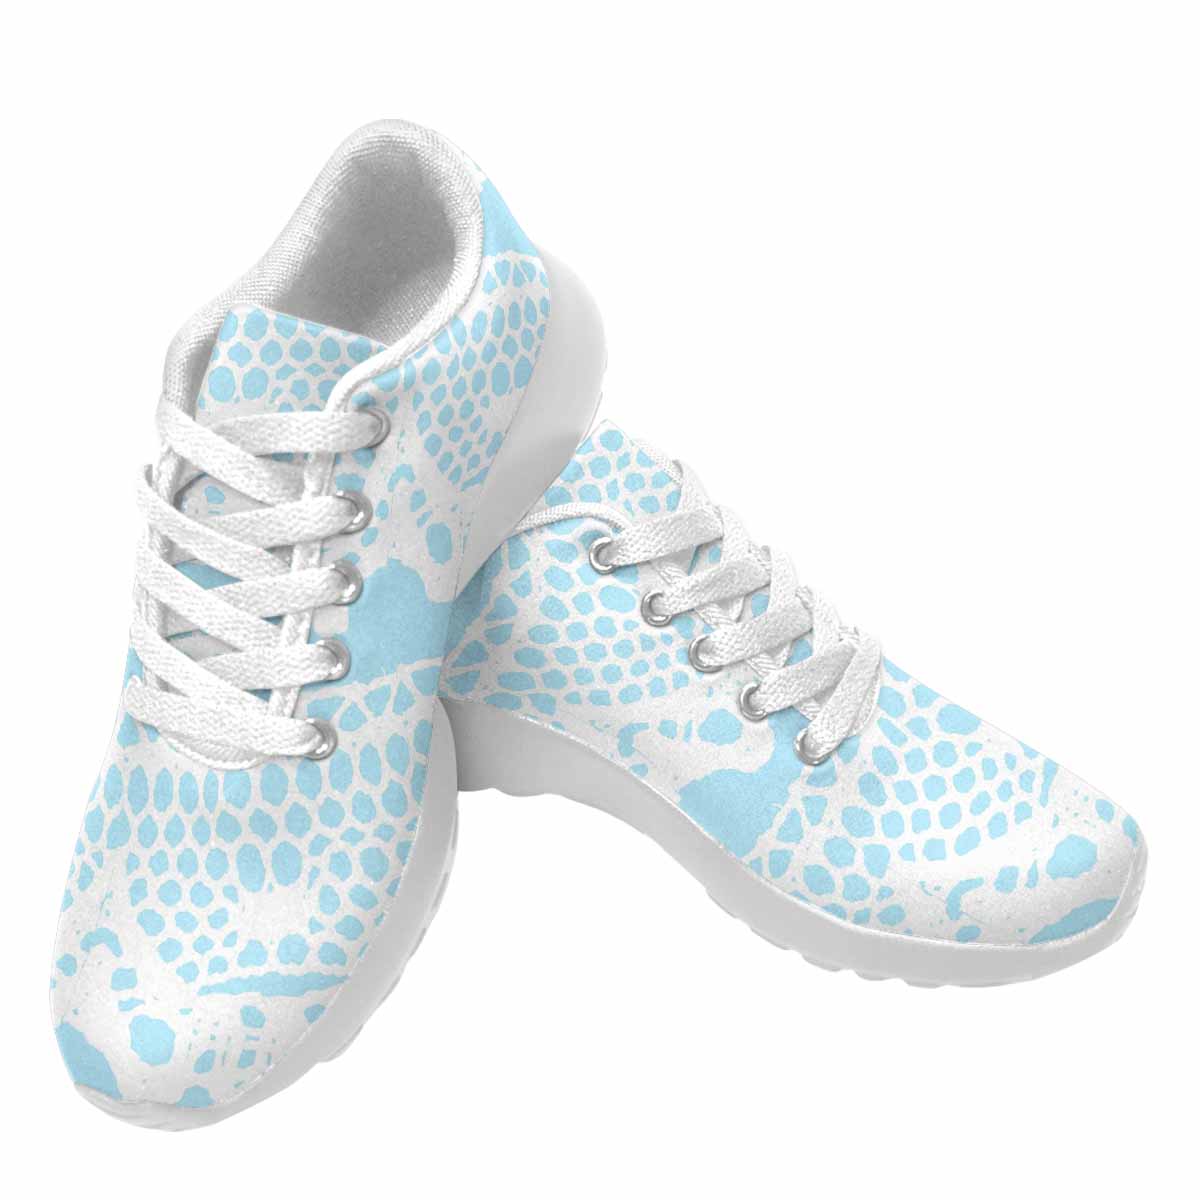 Victorian lace print, womens cute casual or running sneakers, design 08